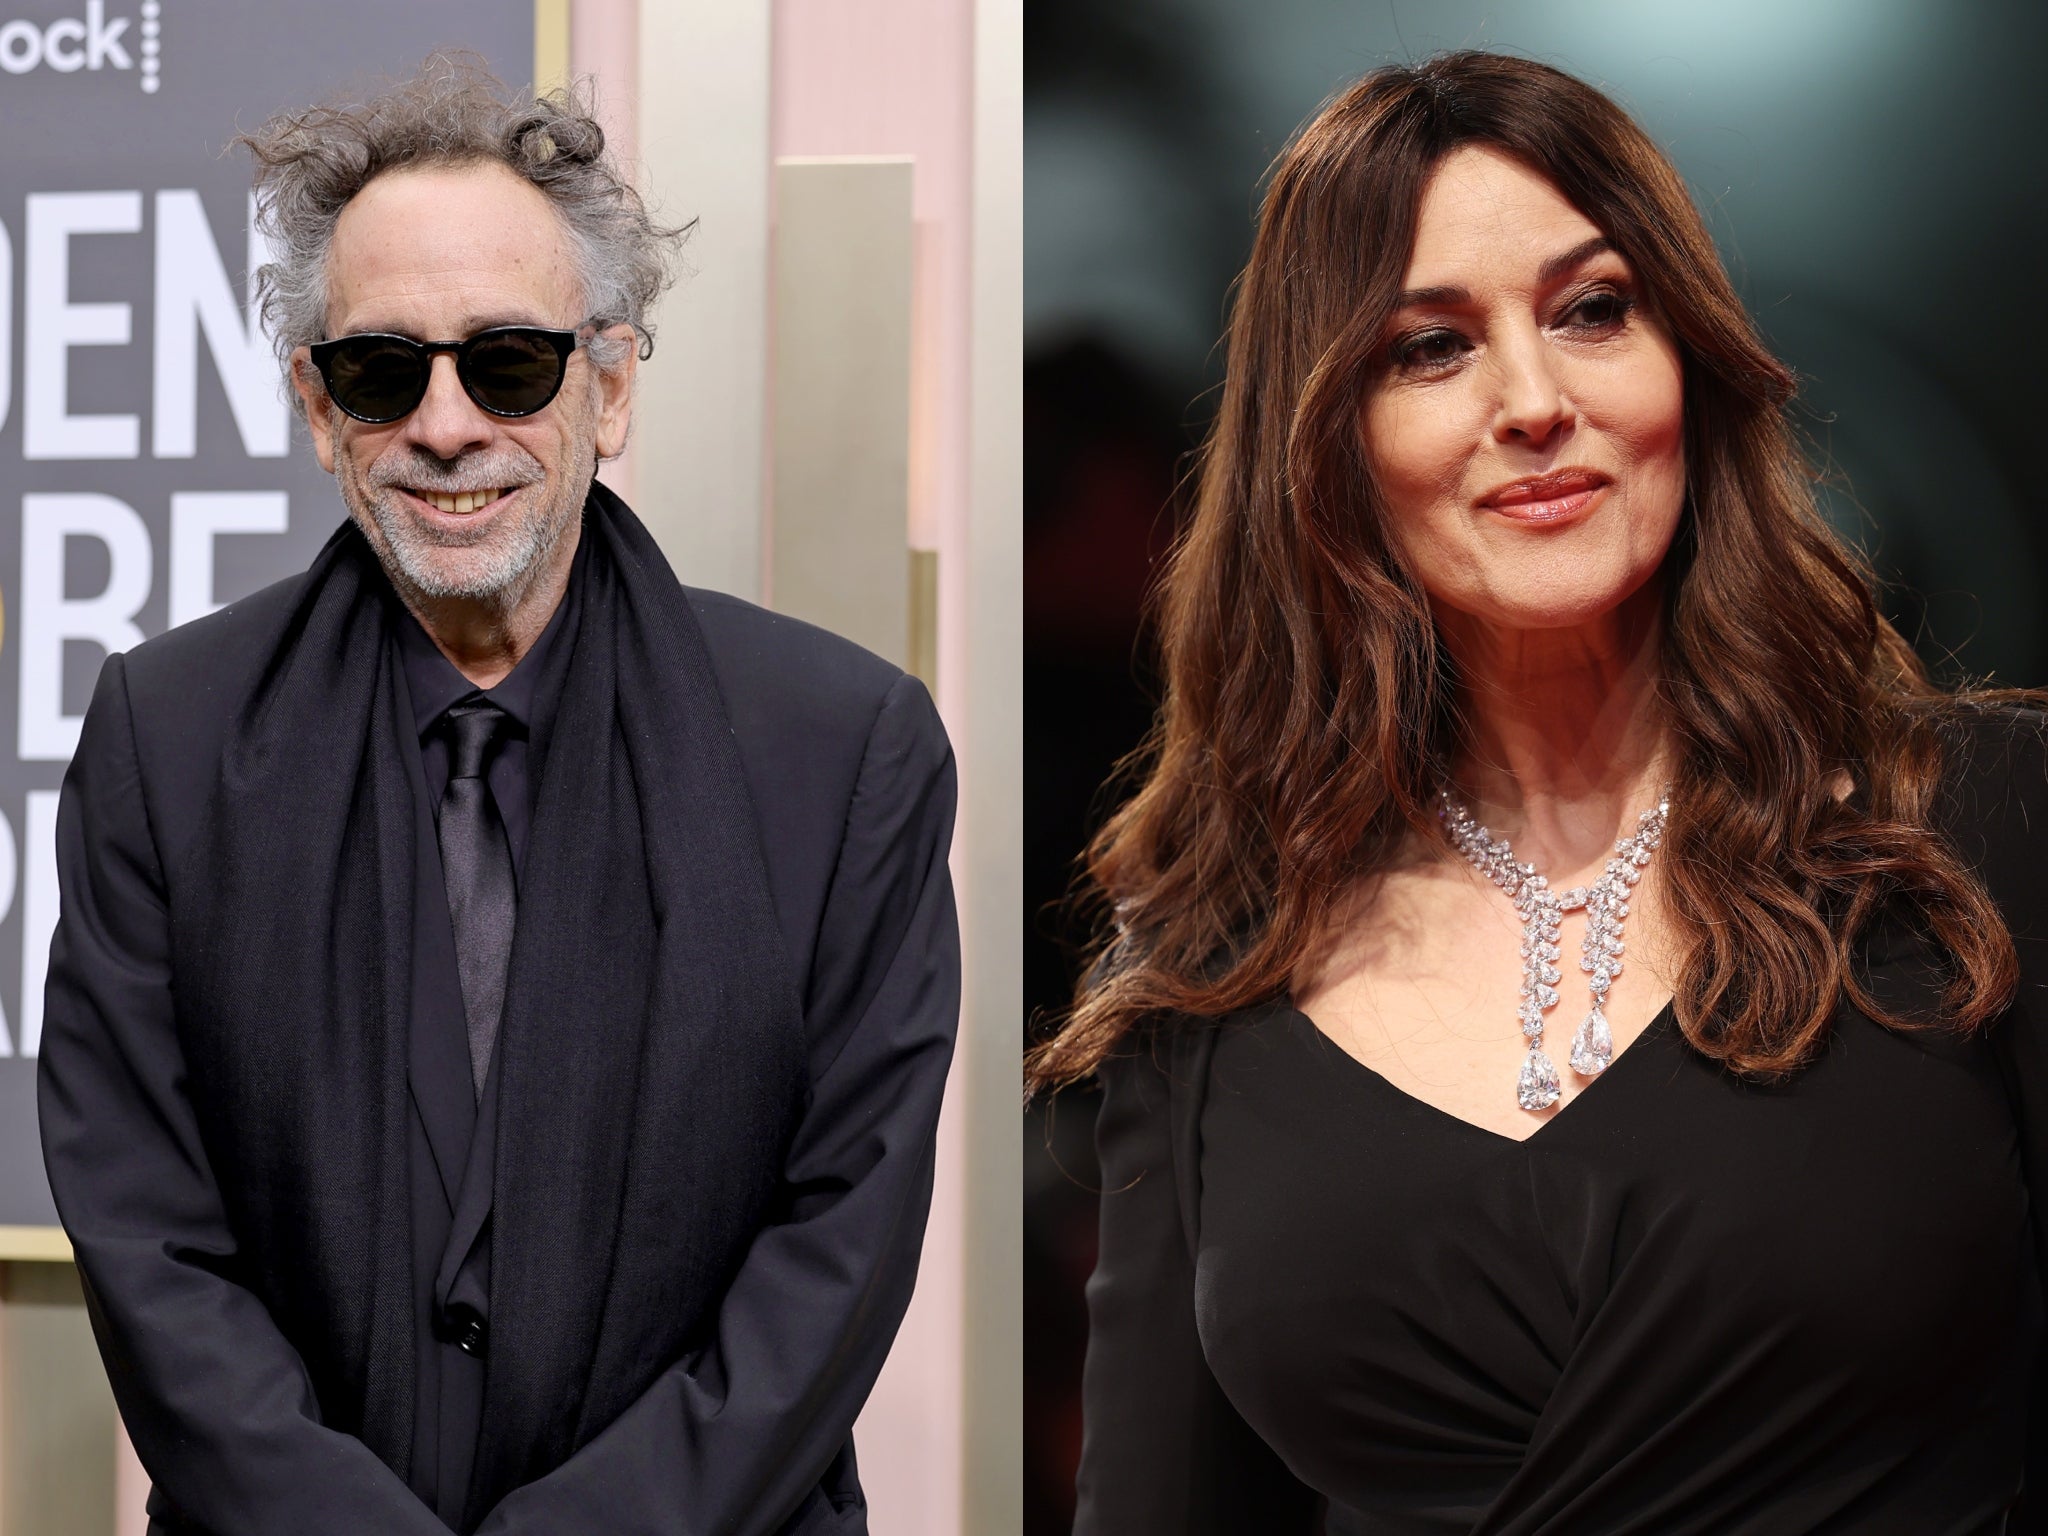 Tim Burton appears 'so in love' as he makes red carpet debut with